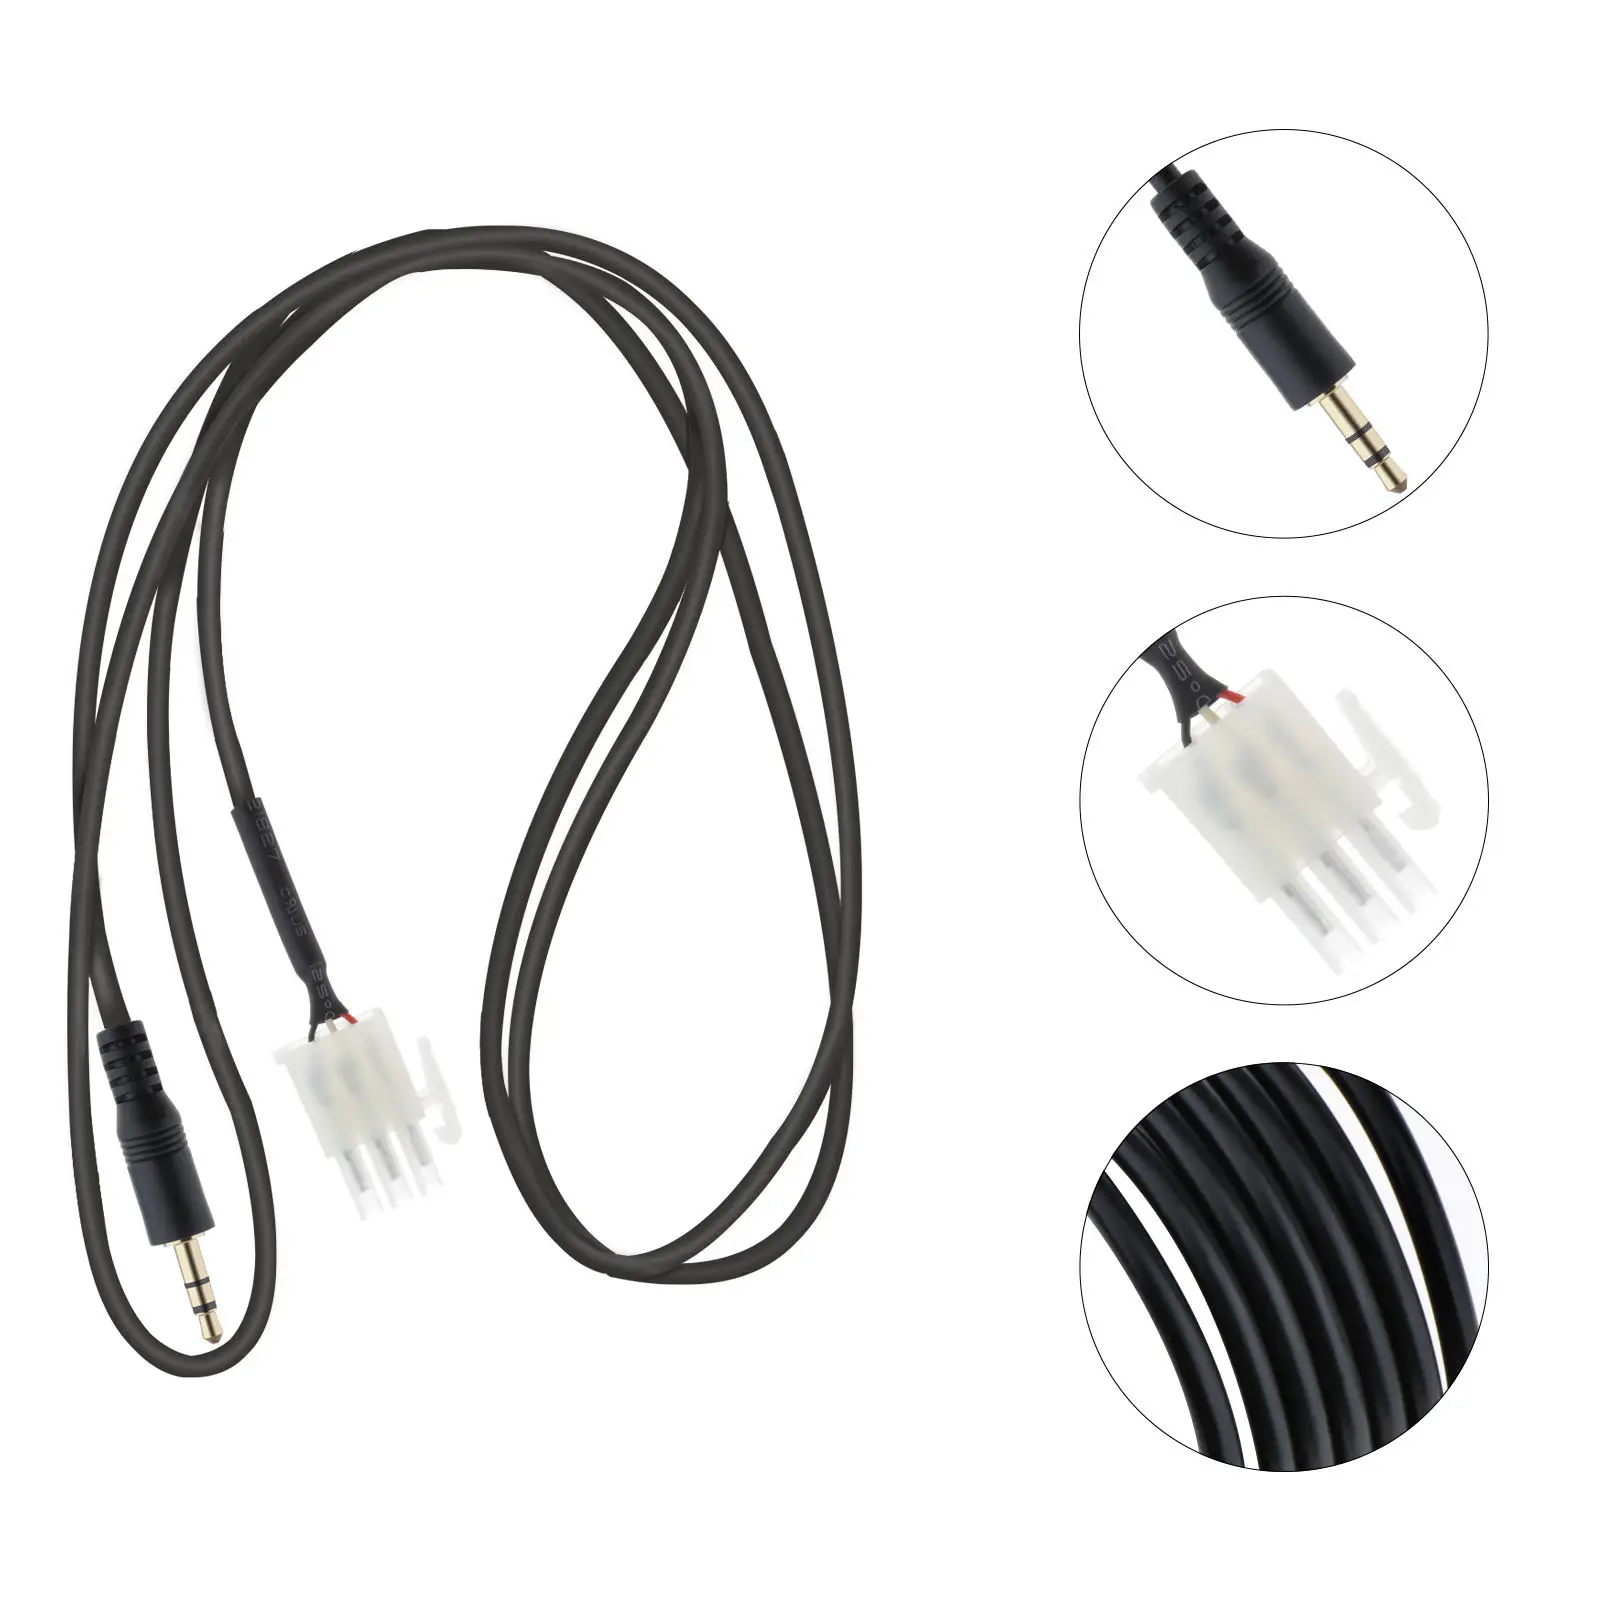 3.5mm Motorcycle AUX Audio Cable Male Line 3-PIN For Honda GL1800 Goldwing